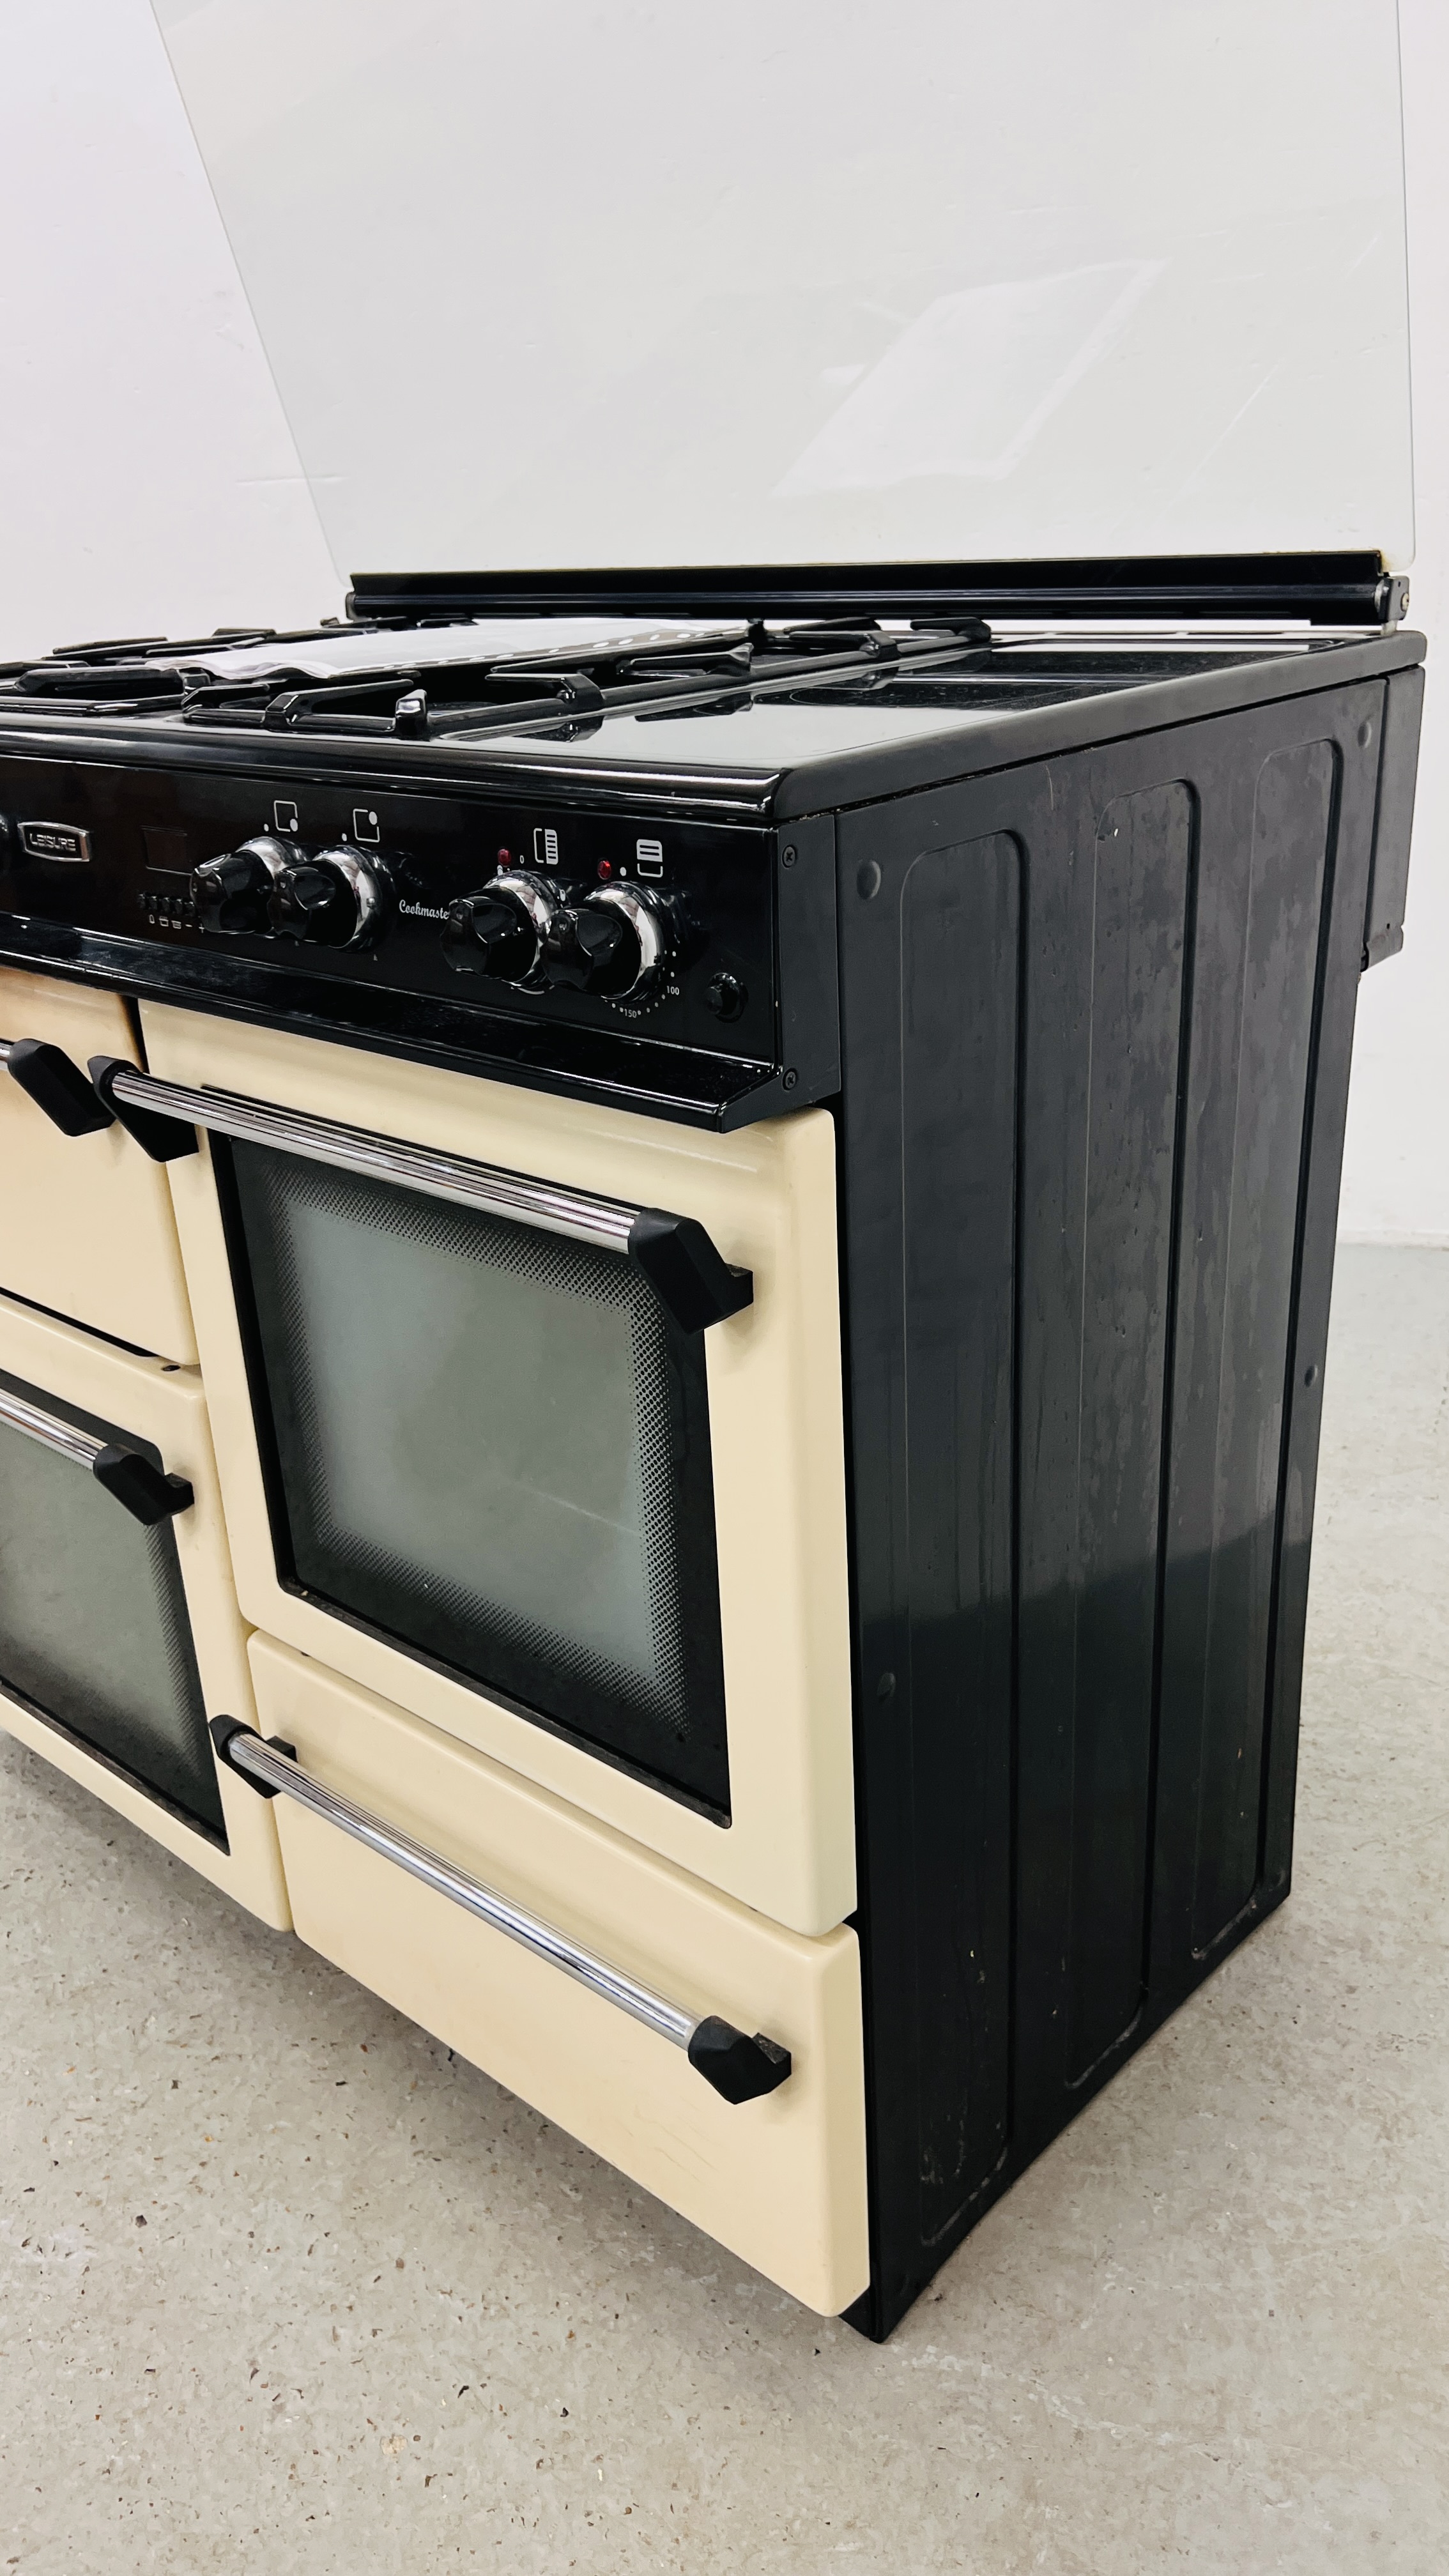 LEISURE COOKMASTER 101 ELECTRIC COOKER RANGE WITH GAS HOB (WITH USER GUIDE) WIDTH 100CM. - Image 19 of 28